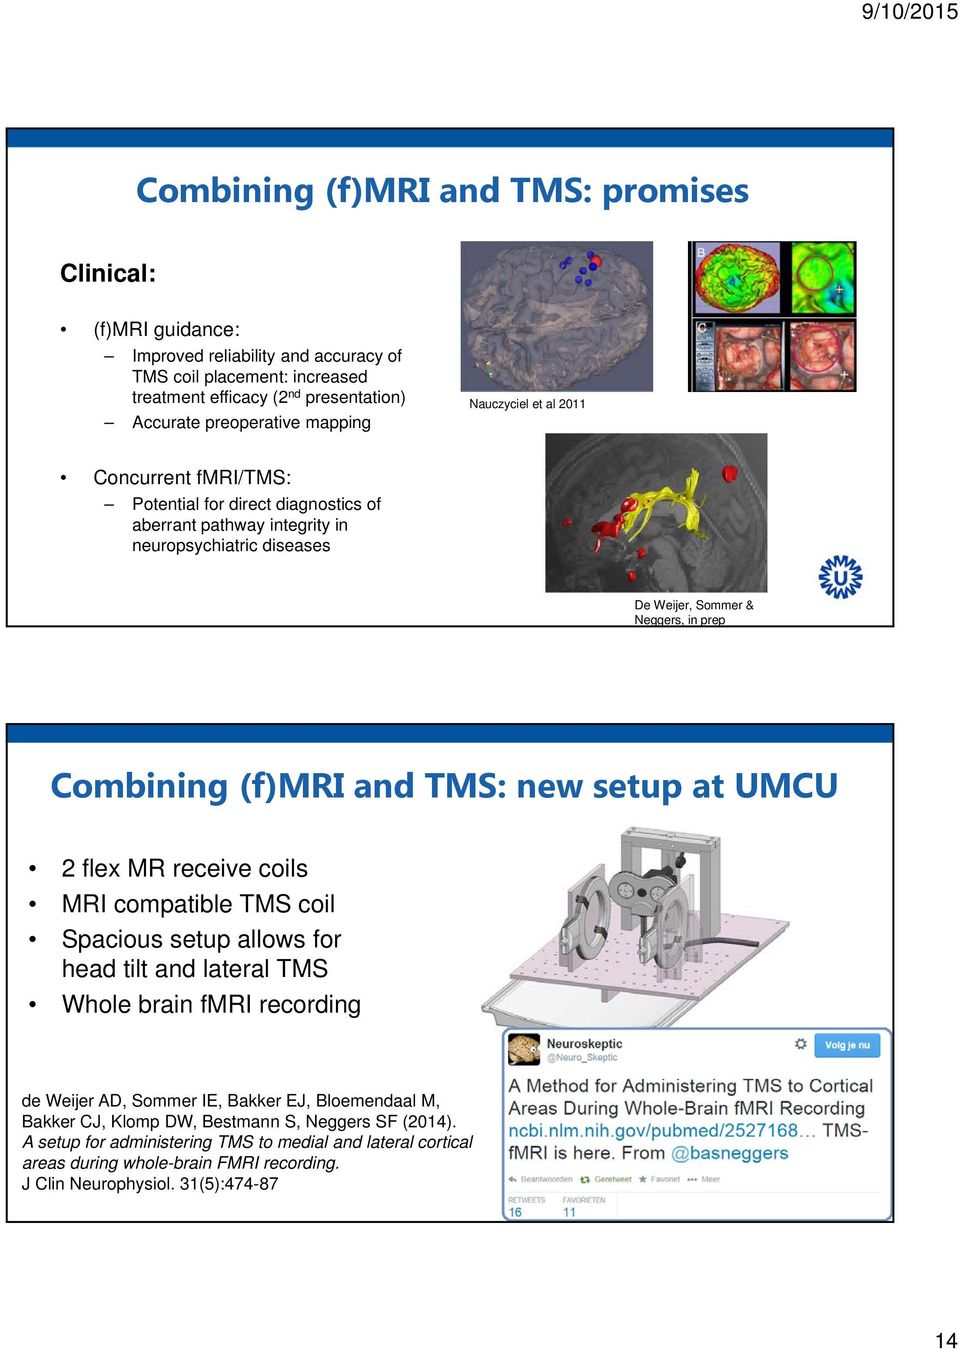 (f)mri and TMS: new setup at UMCU 2 flex MR receive coils MRI compatible TMS coil Spacious setup allows for head tilt and lateral TMS Whole brain fmri recording de Weijer AD, Sommer IE, Bakker